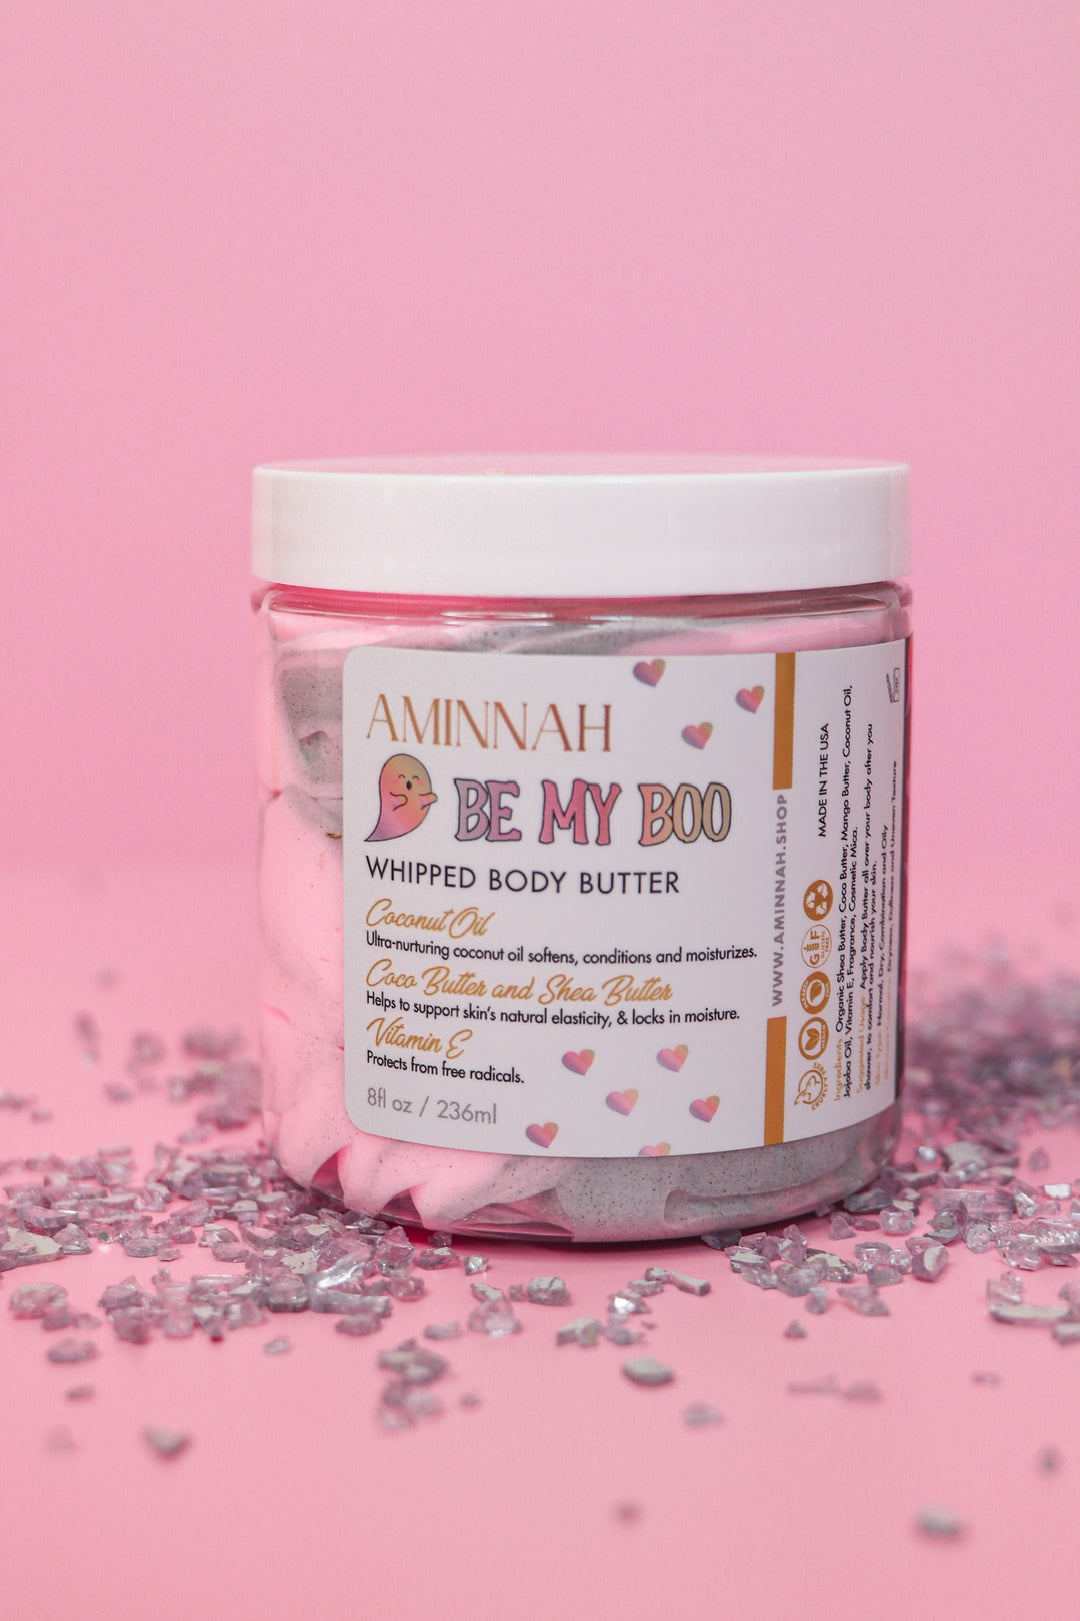 "Be My Boo" Whipped Body Butter 👻